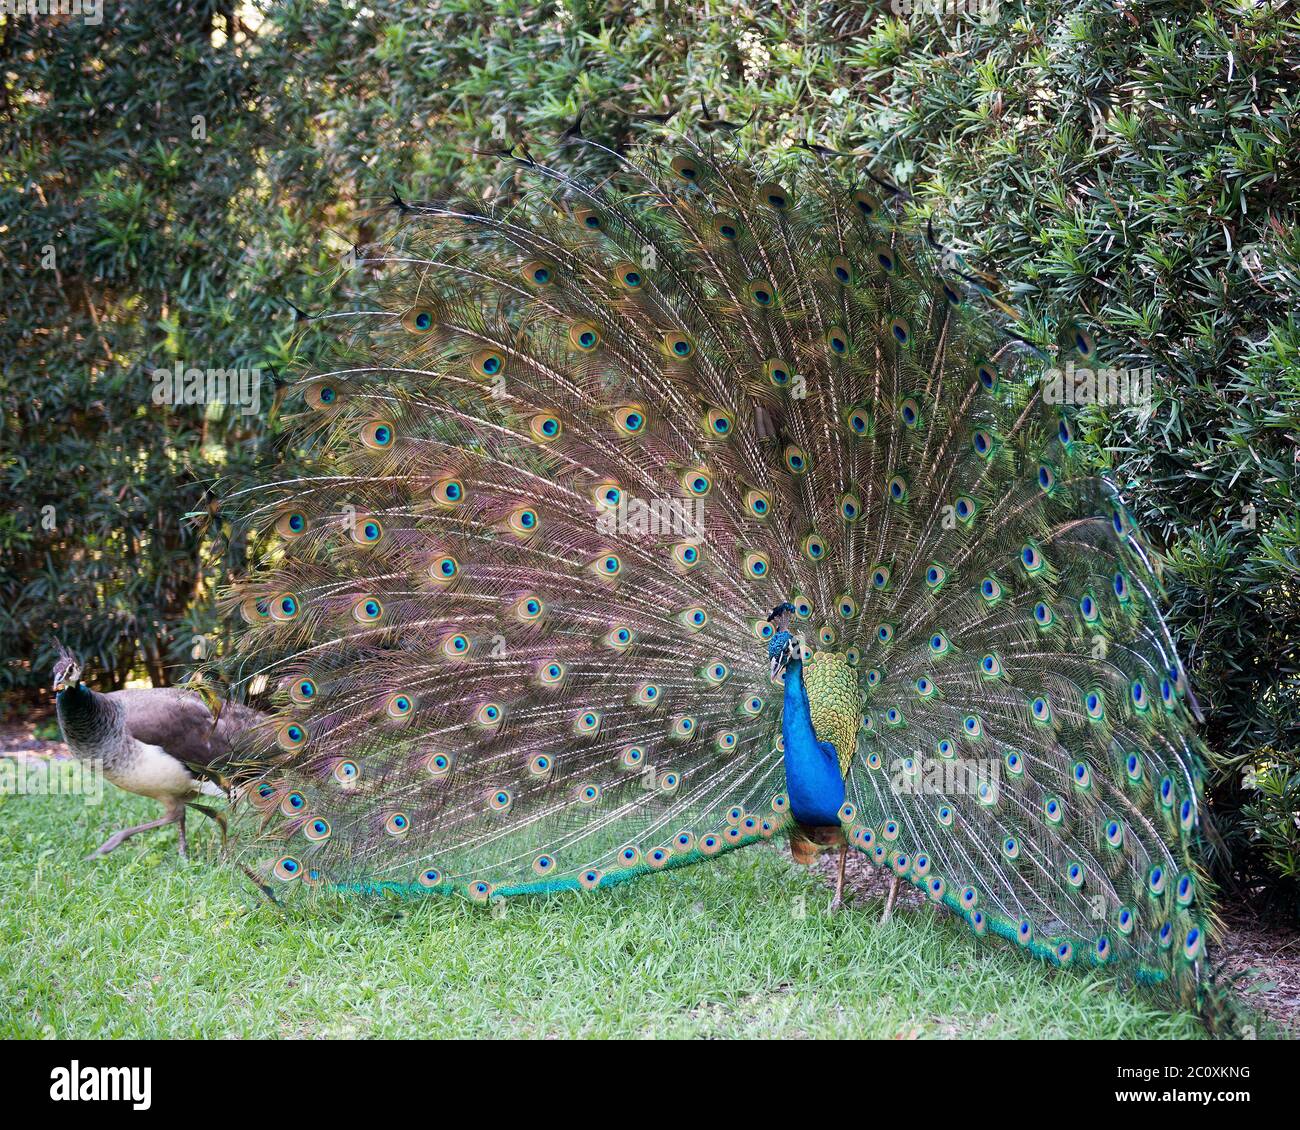 Peacock bird, the beautiful colorful bird in courtship with a female peacock present. Peacock bird displaying fold open elaborate fan with train shimm Stock Photo